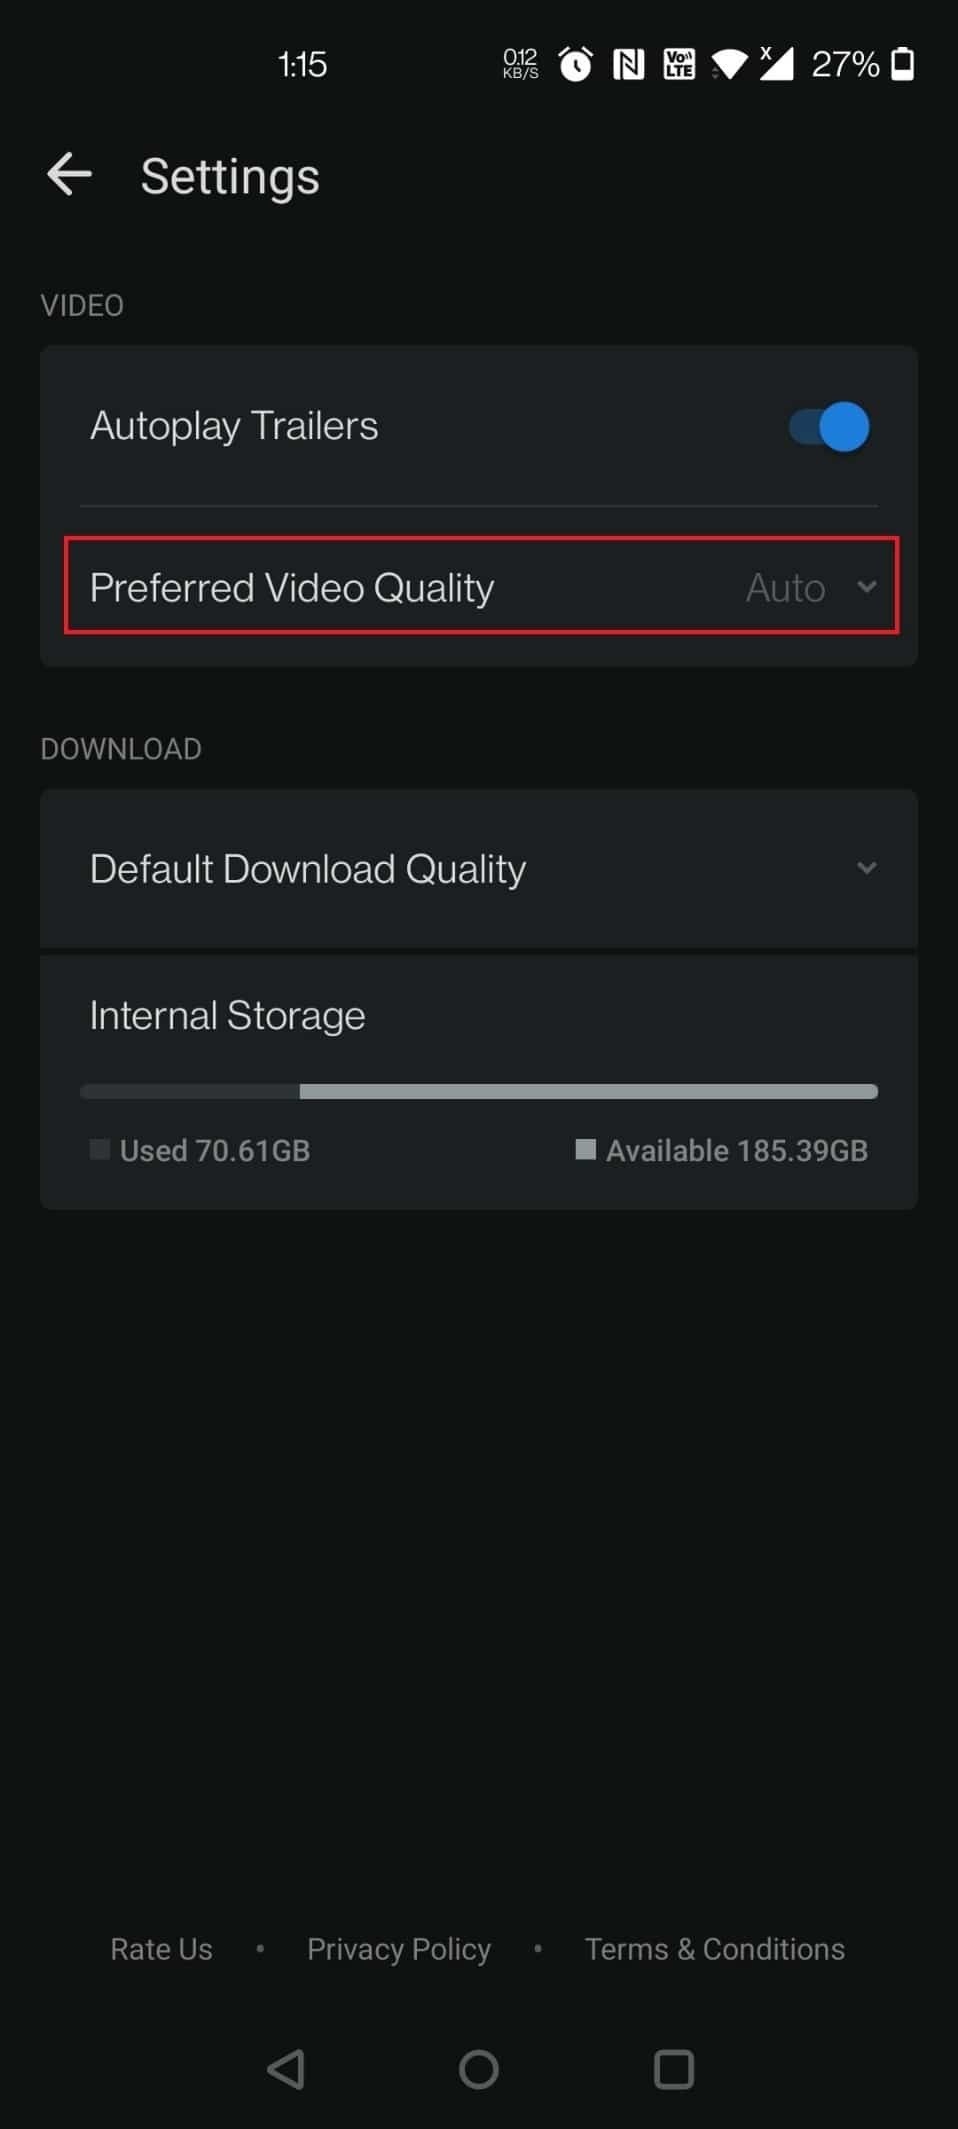 tap on Preferred Video Quality